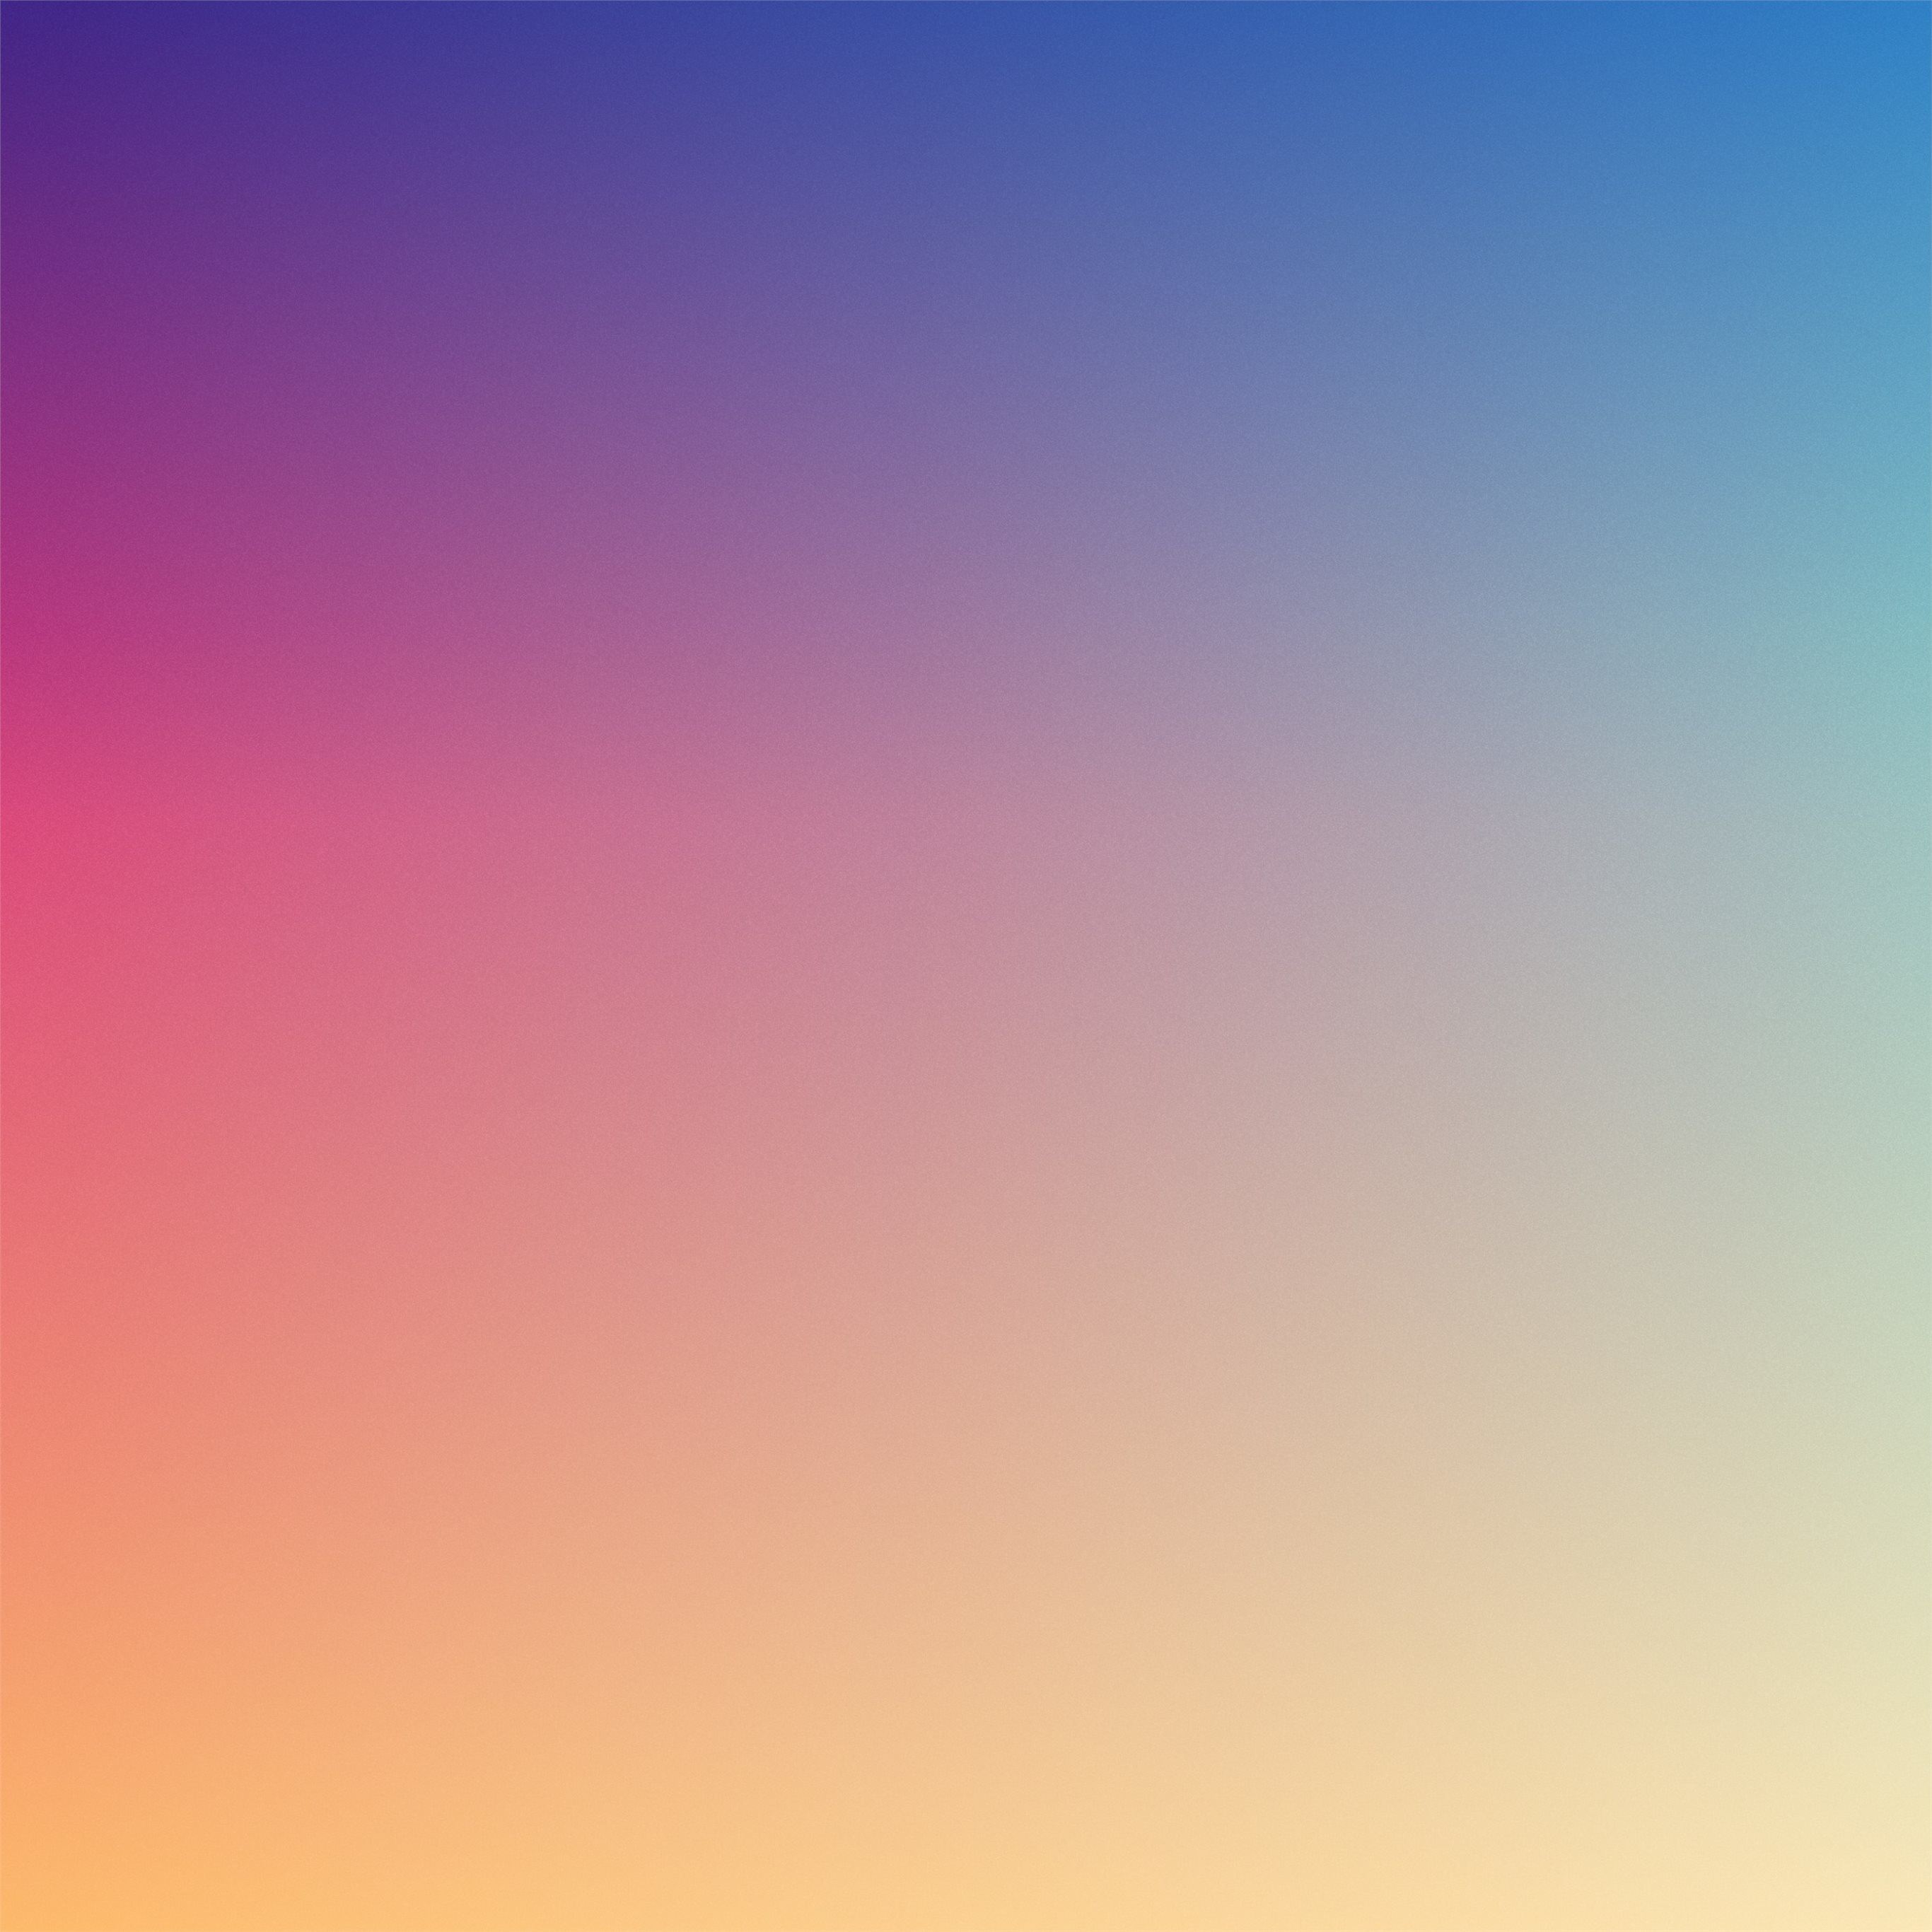 Blurred iOS 12 Stock Wallpaper  Wallpapers Central